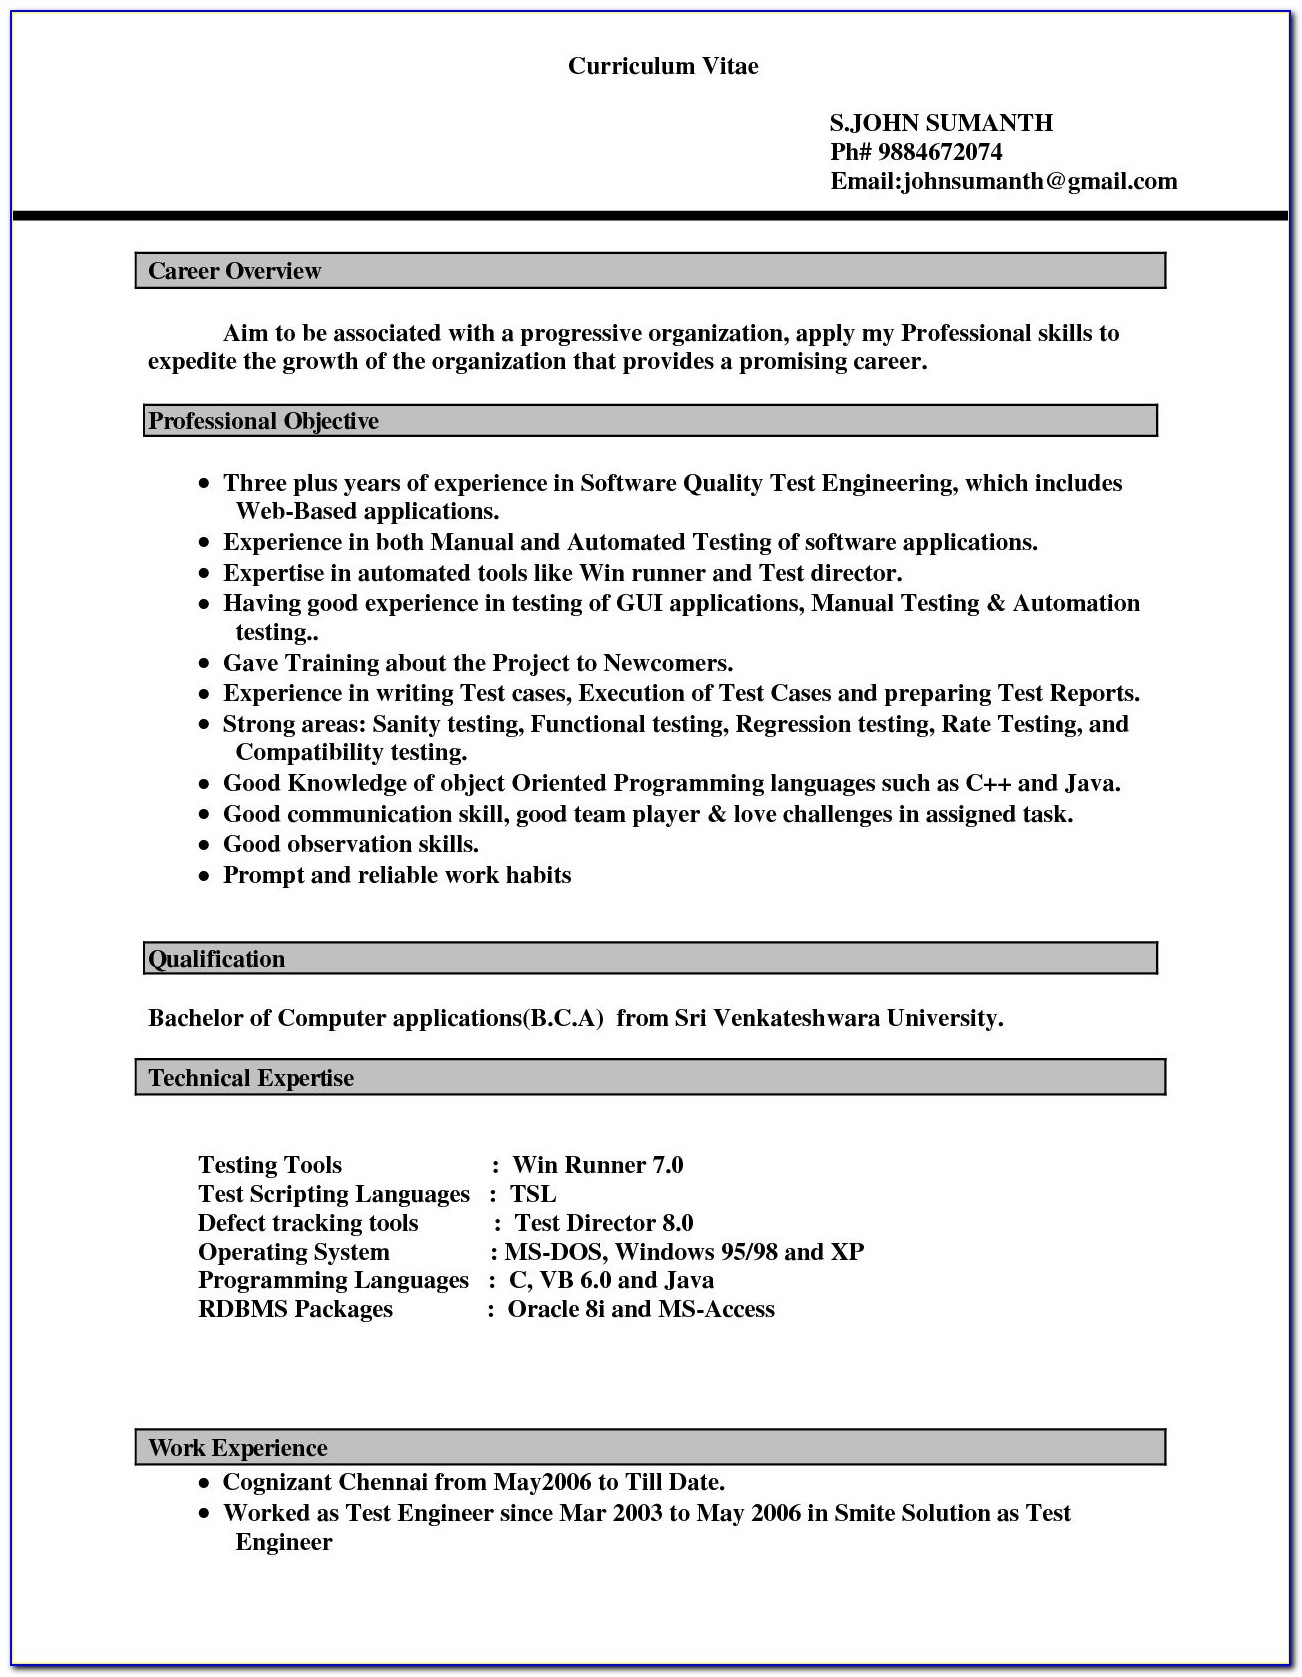 Resume Format Download In Ms Word Free